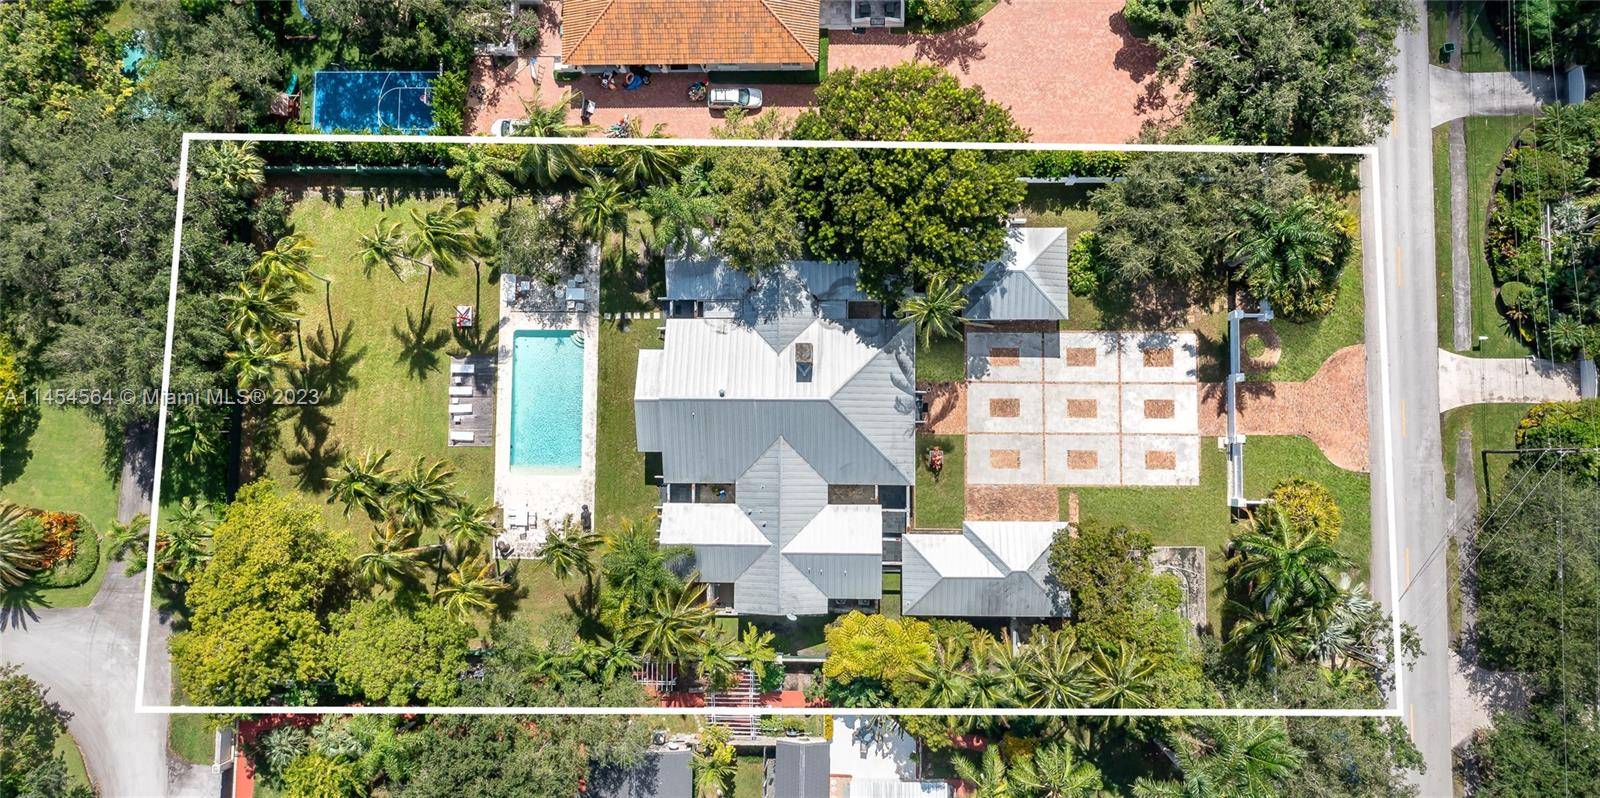 Key West style estate, situated on a sprawling 1 acre street to street lot in the desirable CORAL GABLES neighborhood.